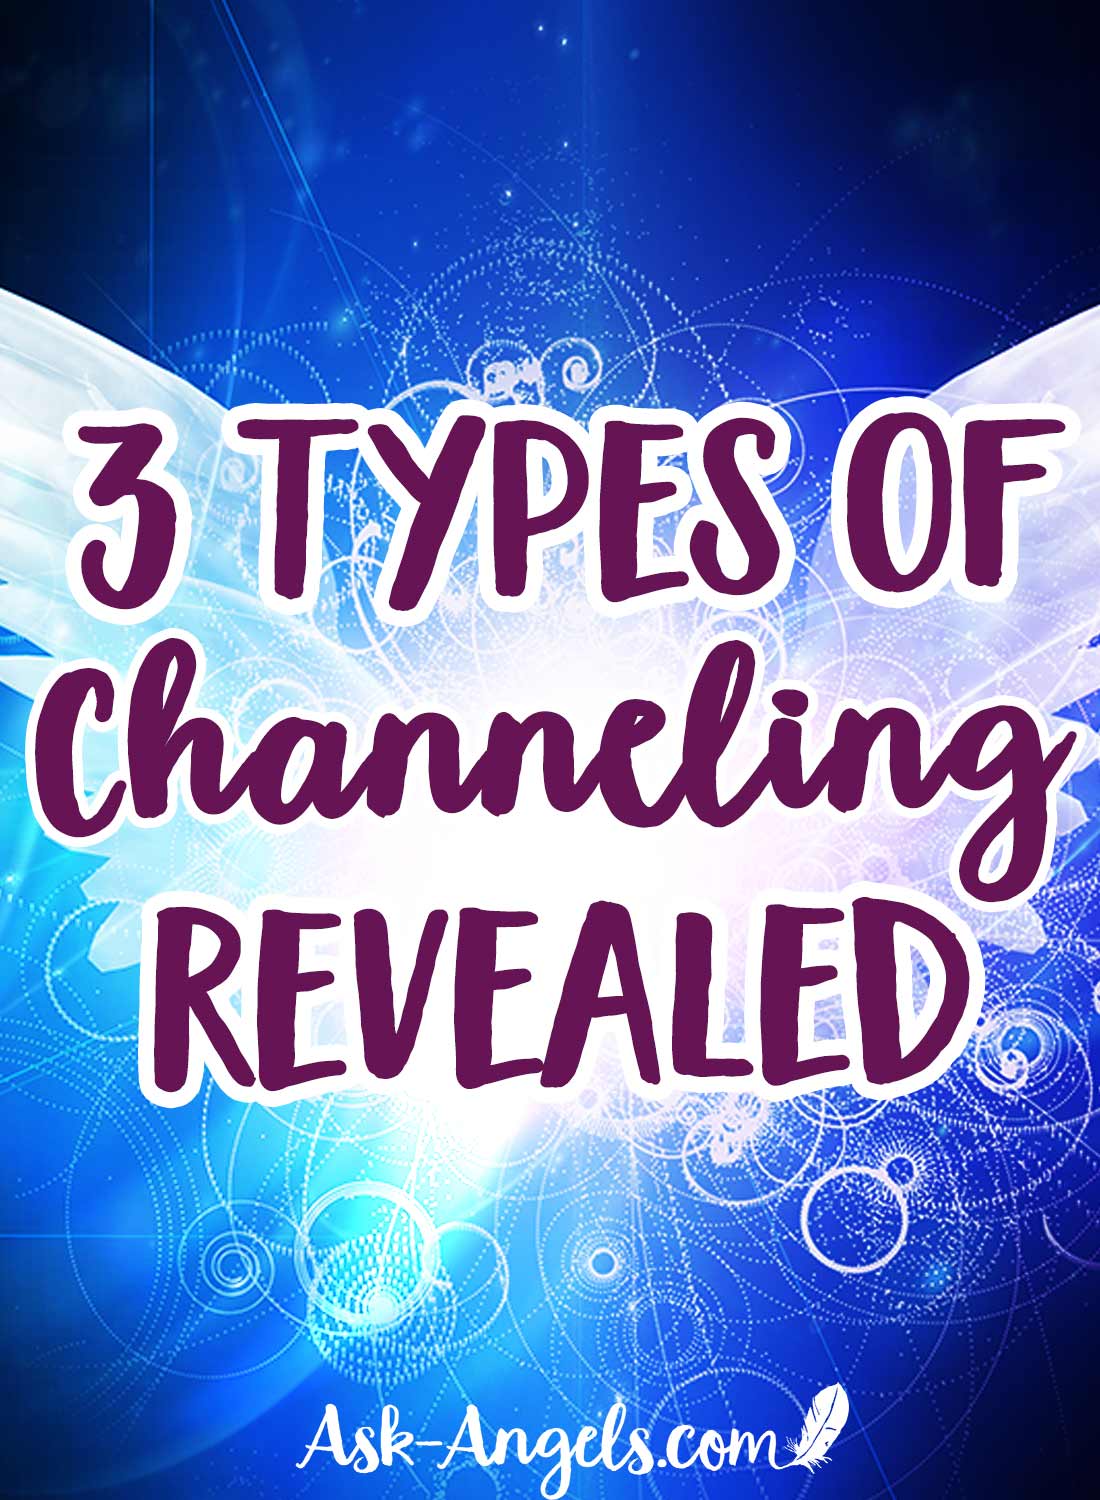 3 Types of Channeling Revealed